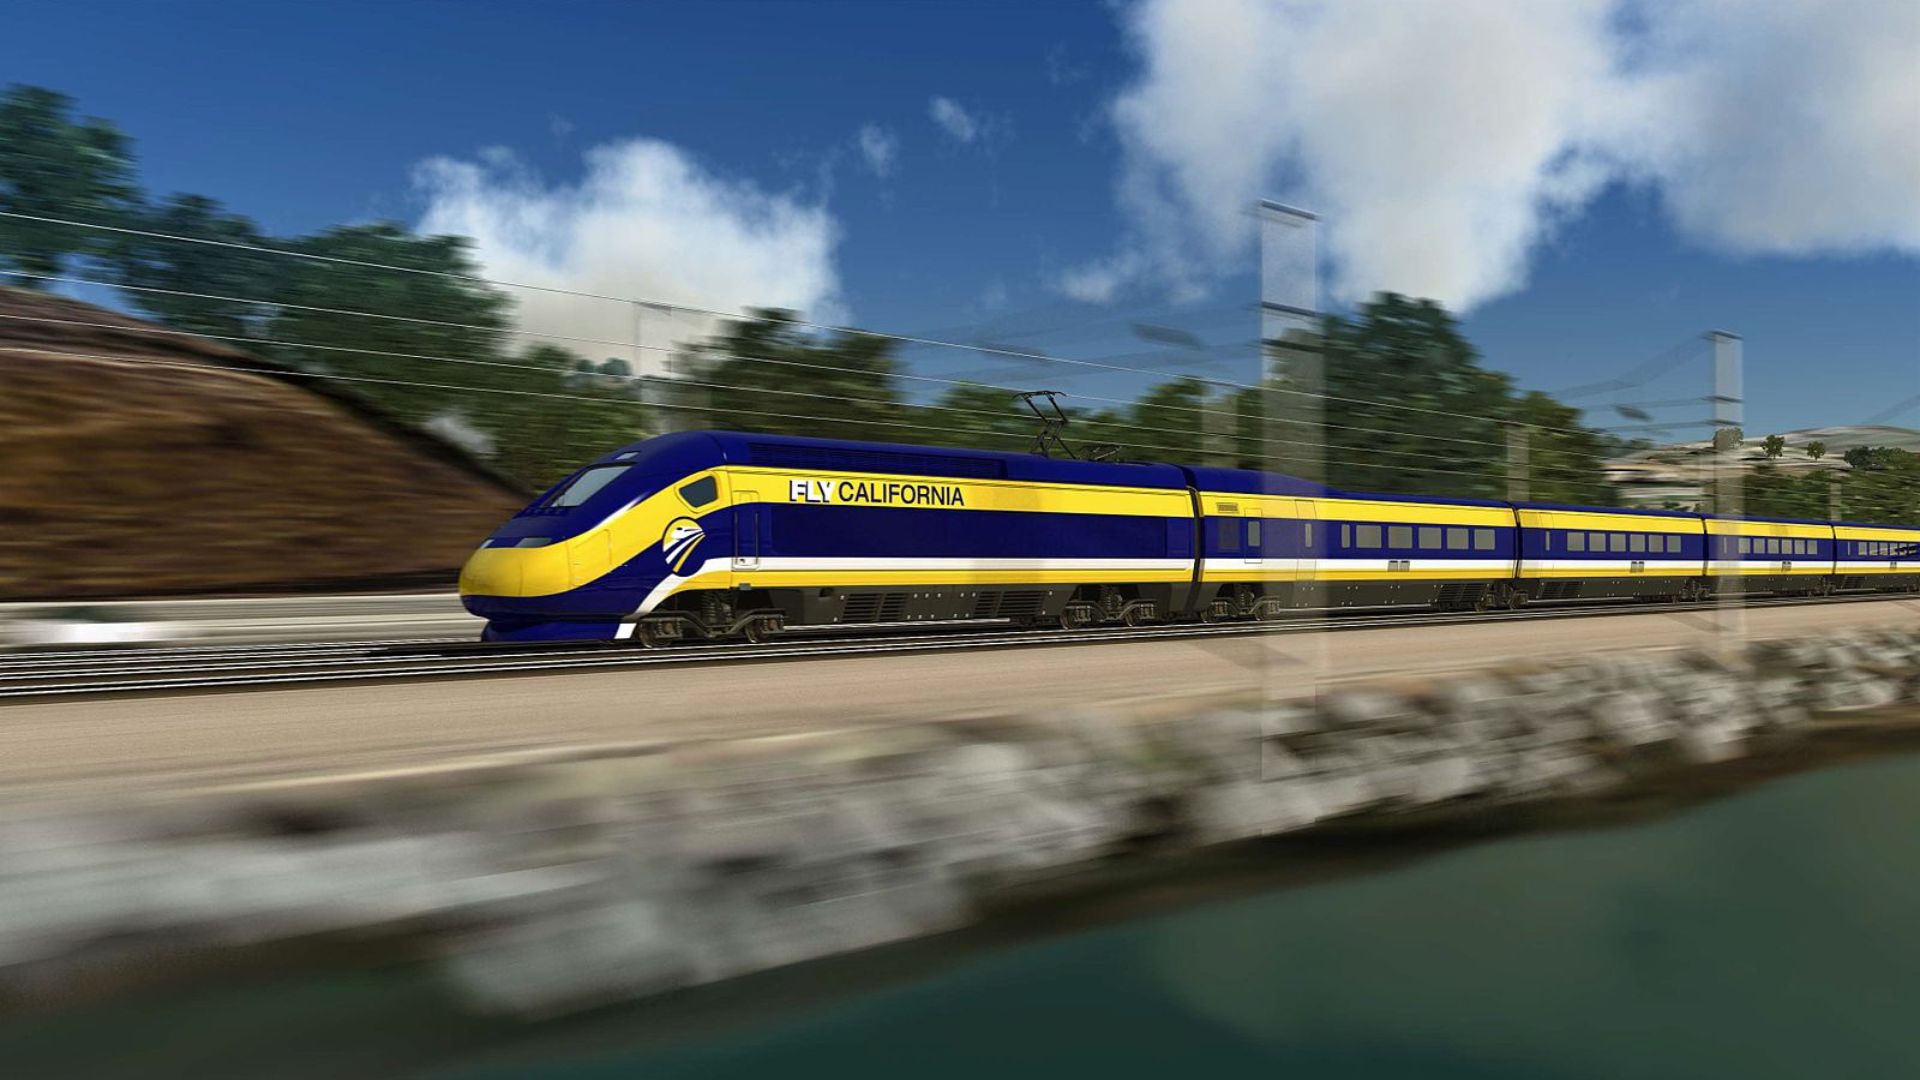 <p>The Brightline West isn’t the only rail project facing challenges in California. Back in 2008, a "bullet train" linking Los Angeles to San Fransisco was pitched to voters.     </p> <p>However, the financial <a href="https://abc7.com/california-bullet-train-project-another-100-billion-needed-high-speed-rail/14525328/">outlook</a> for California's high-speed rail project, initially projected at $40 billion has drastically increased over the years. As per recent statements from state officials, the cost for completing just a 171-mile stretch between Bakersfield and Merced has escalated to $35 billion. To complete the entire line, an additional $100 billion is necessary, underscoring a significant leap from the original budget estimates. </p>